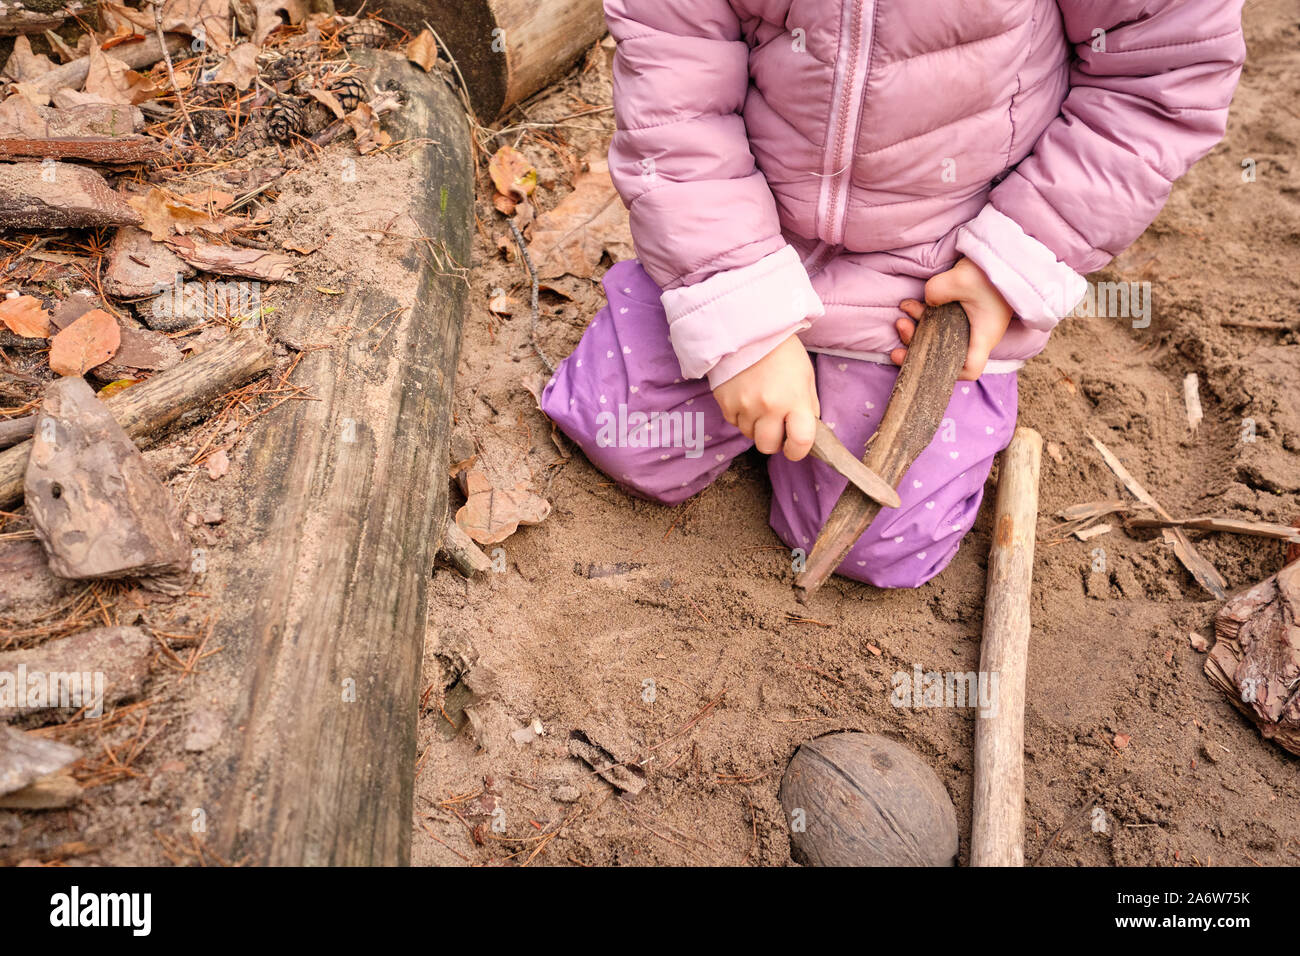 Low section of a child girl playing with wood on a playground in the forest wearing warm clothes in autumn. Seen in Germany, Bavaria in October. Stock Photo